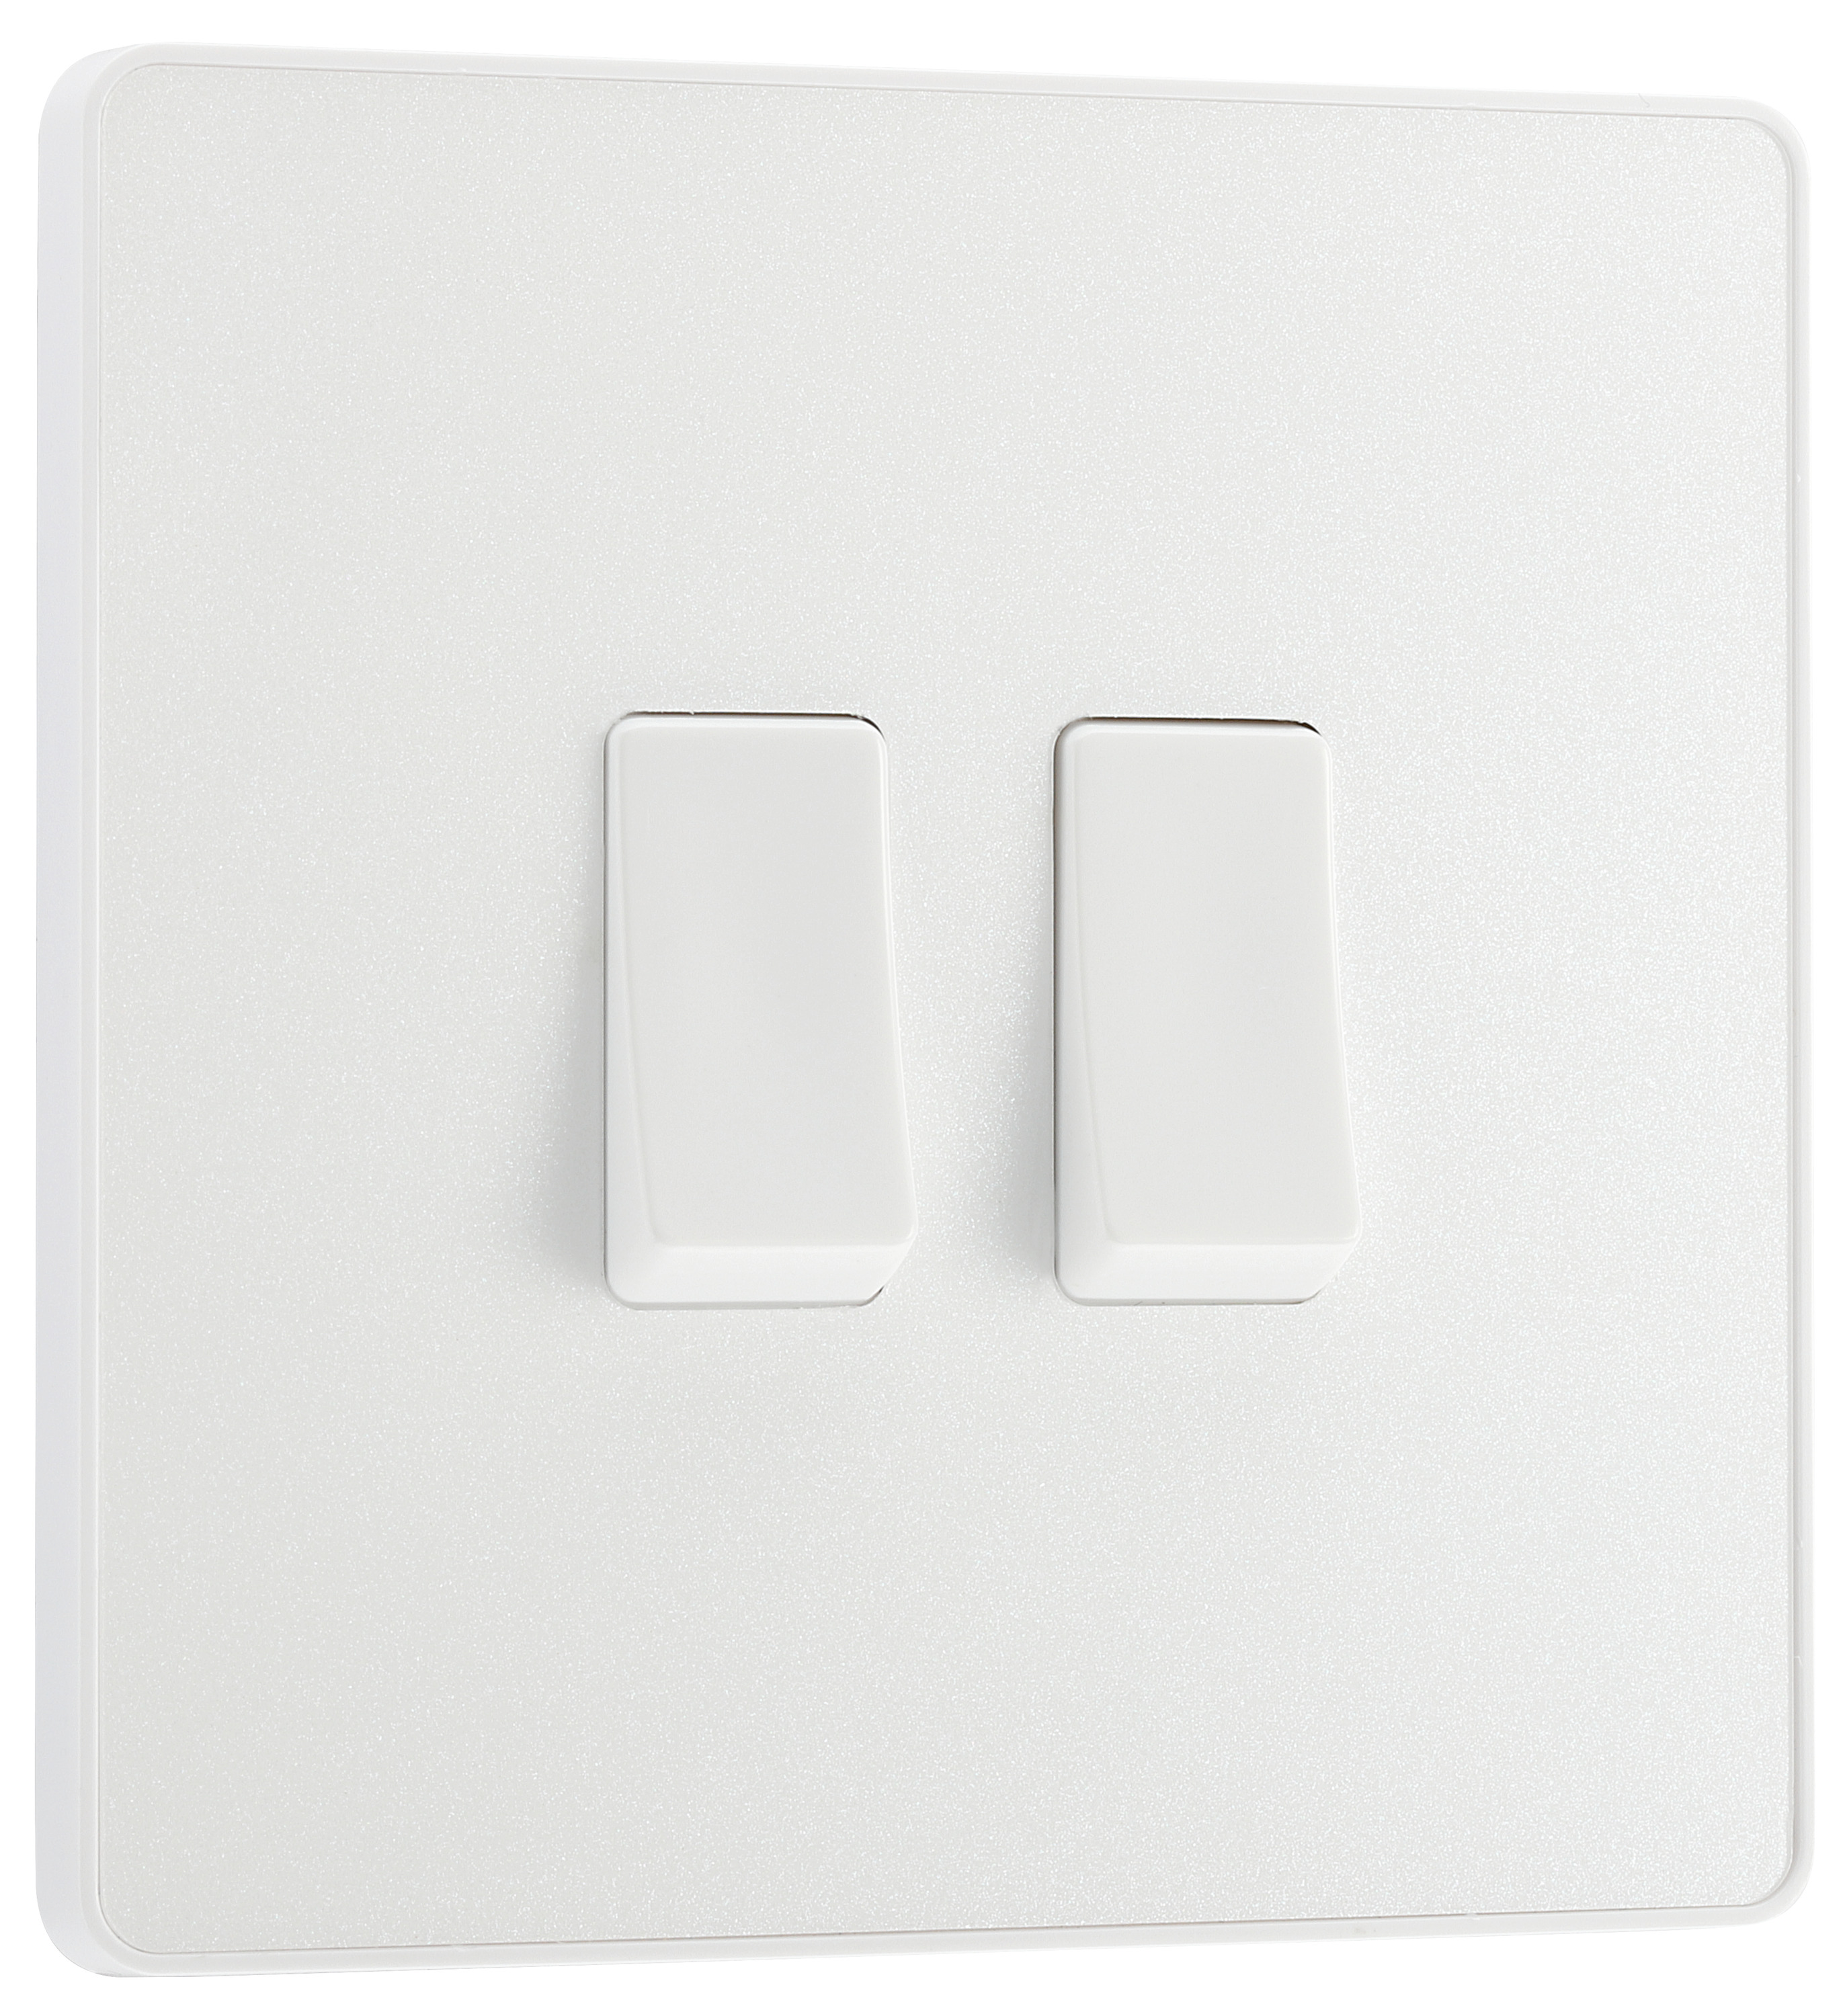 BG Evolve Pearlescent White 20A Double Switch - 2 Way